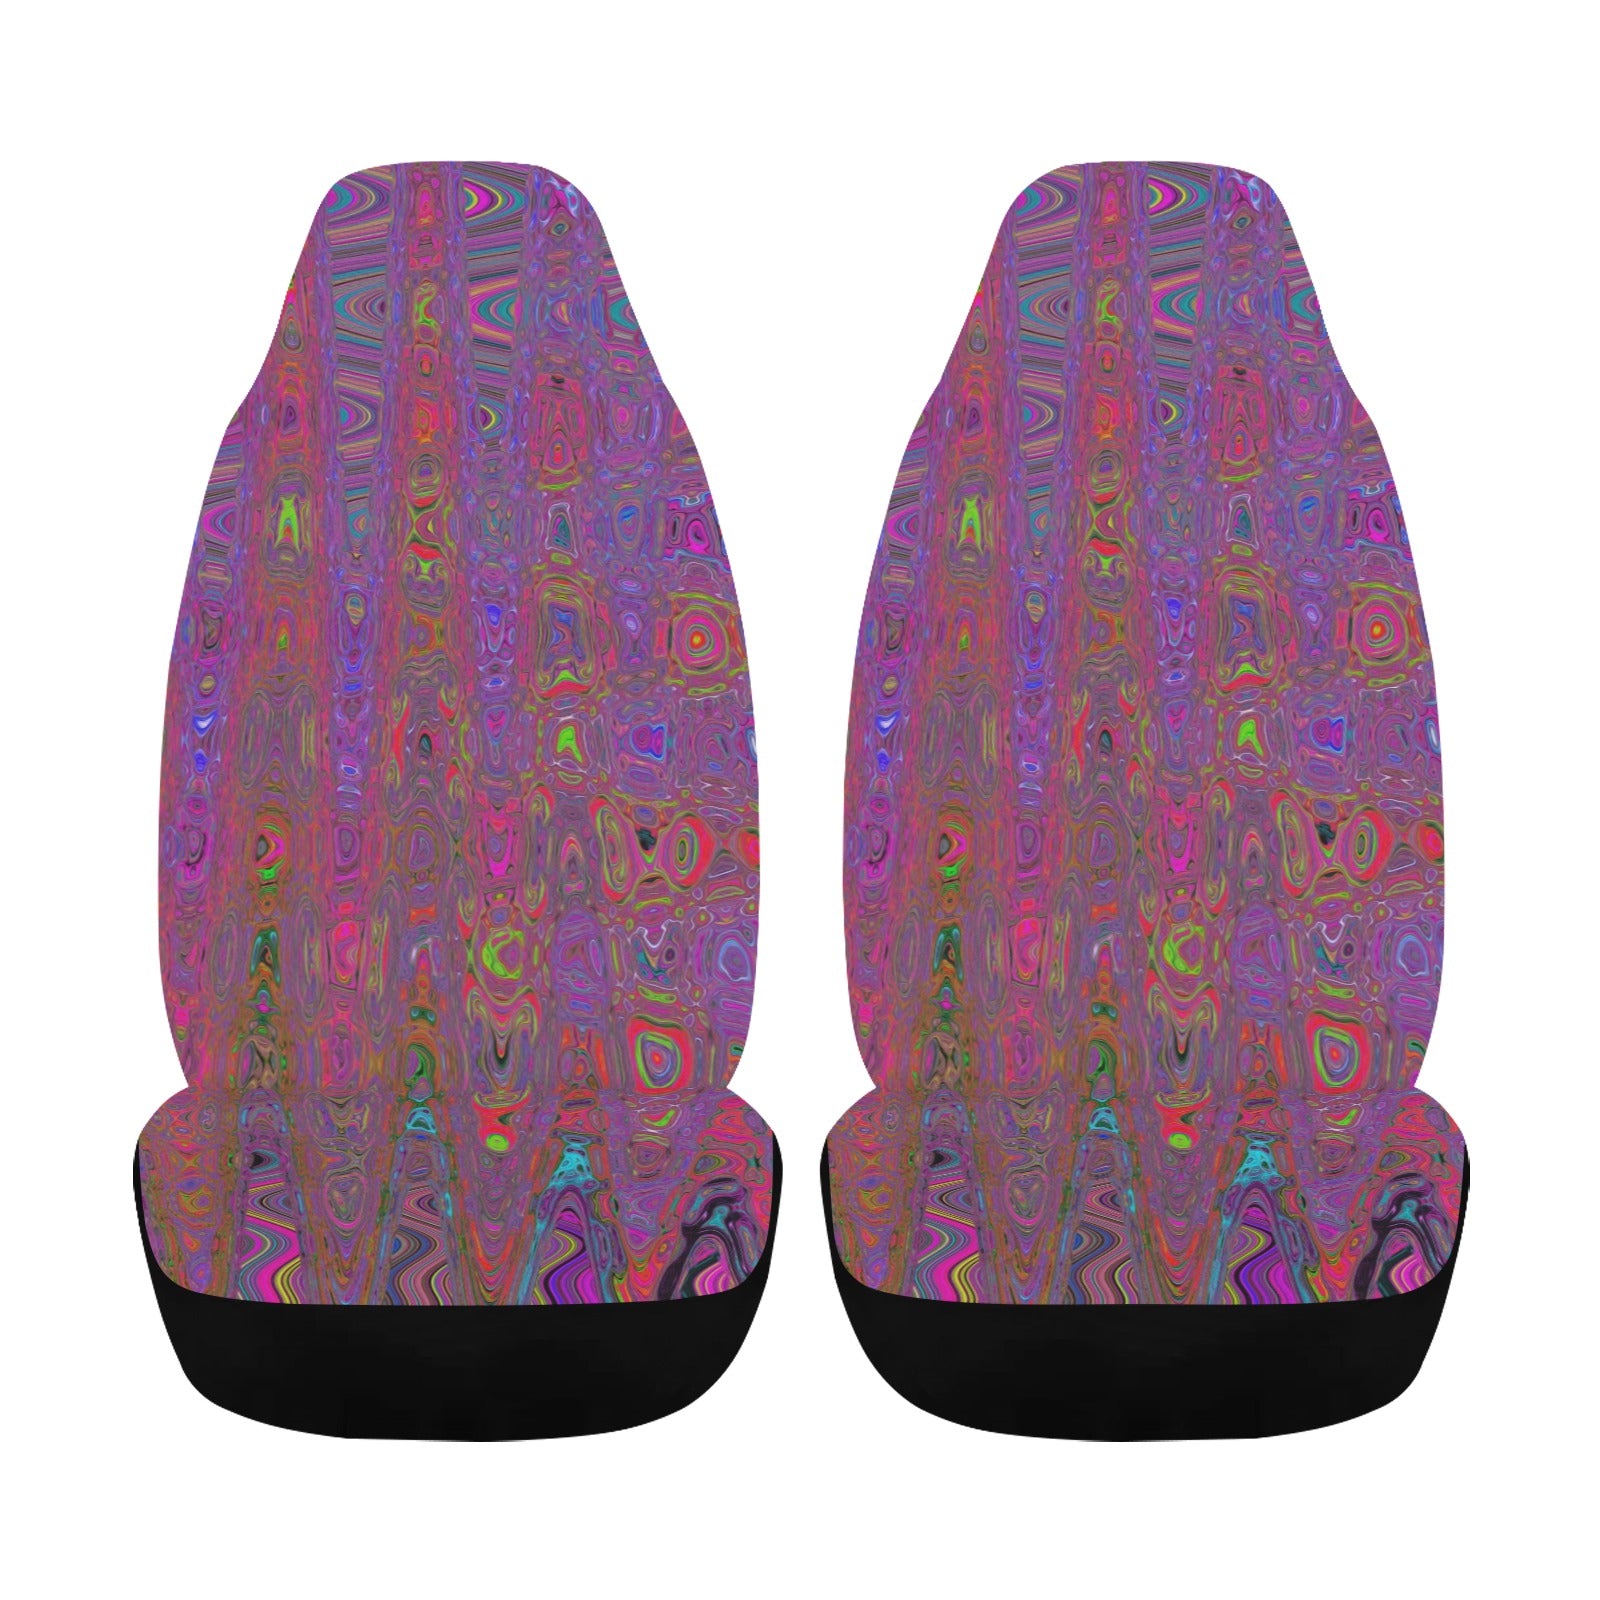 Car Seat Covers | Psychedelic Groovy Magenta Retro Atomic Waves